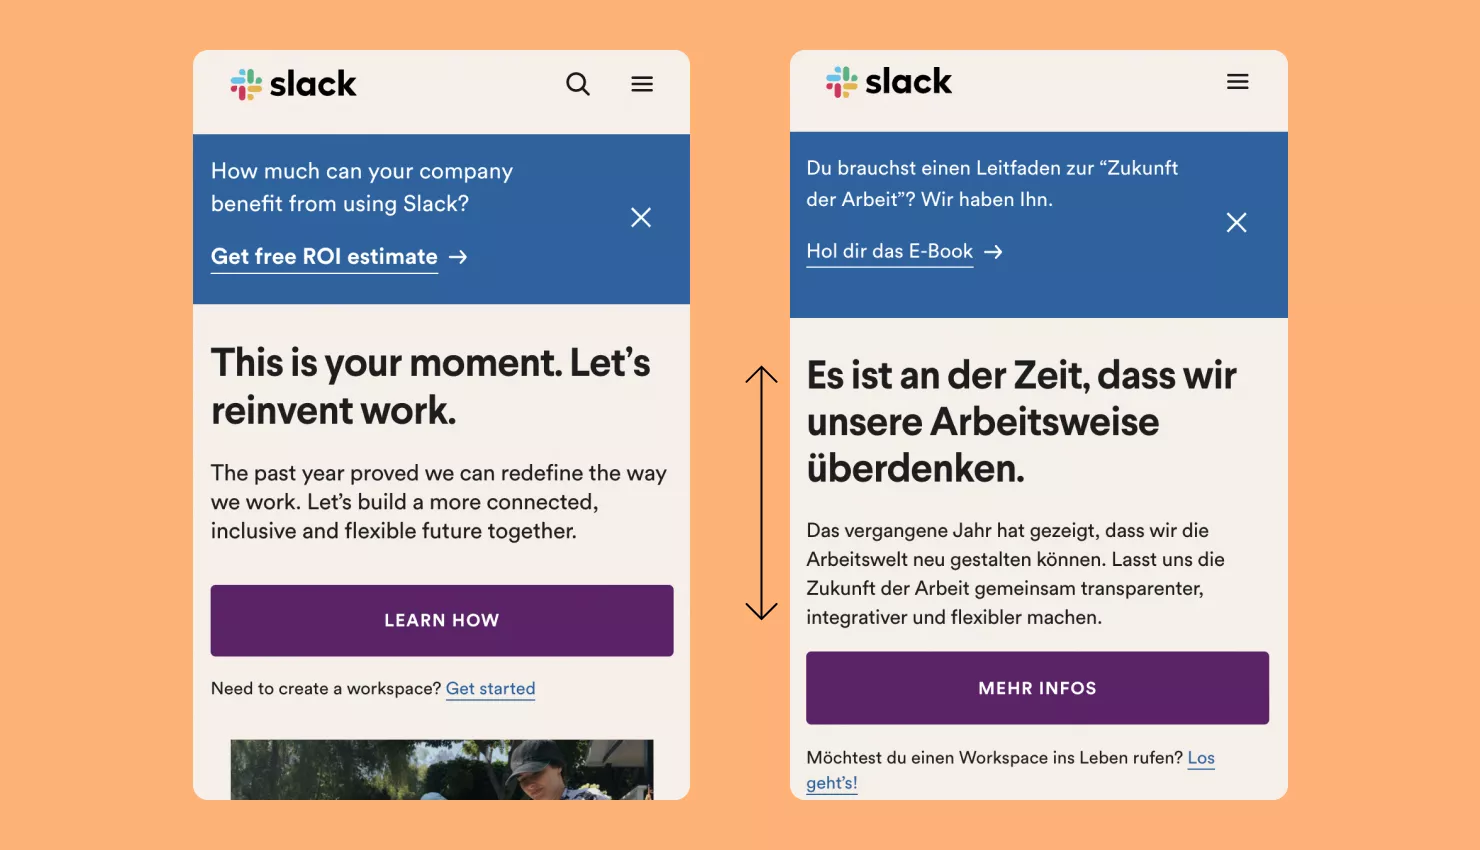 Slack vertical text expansion example